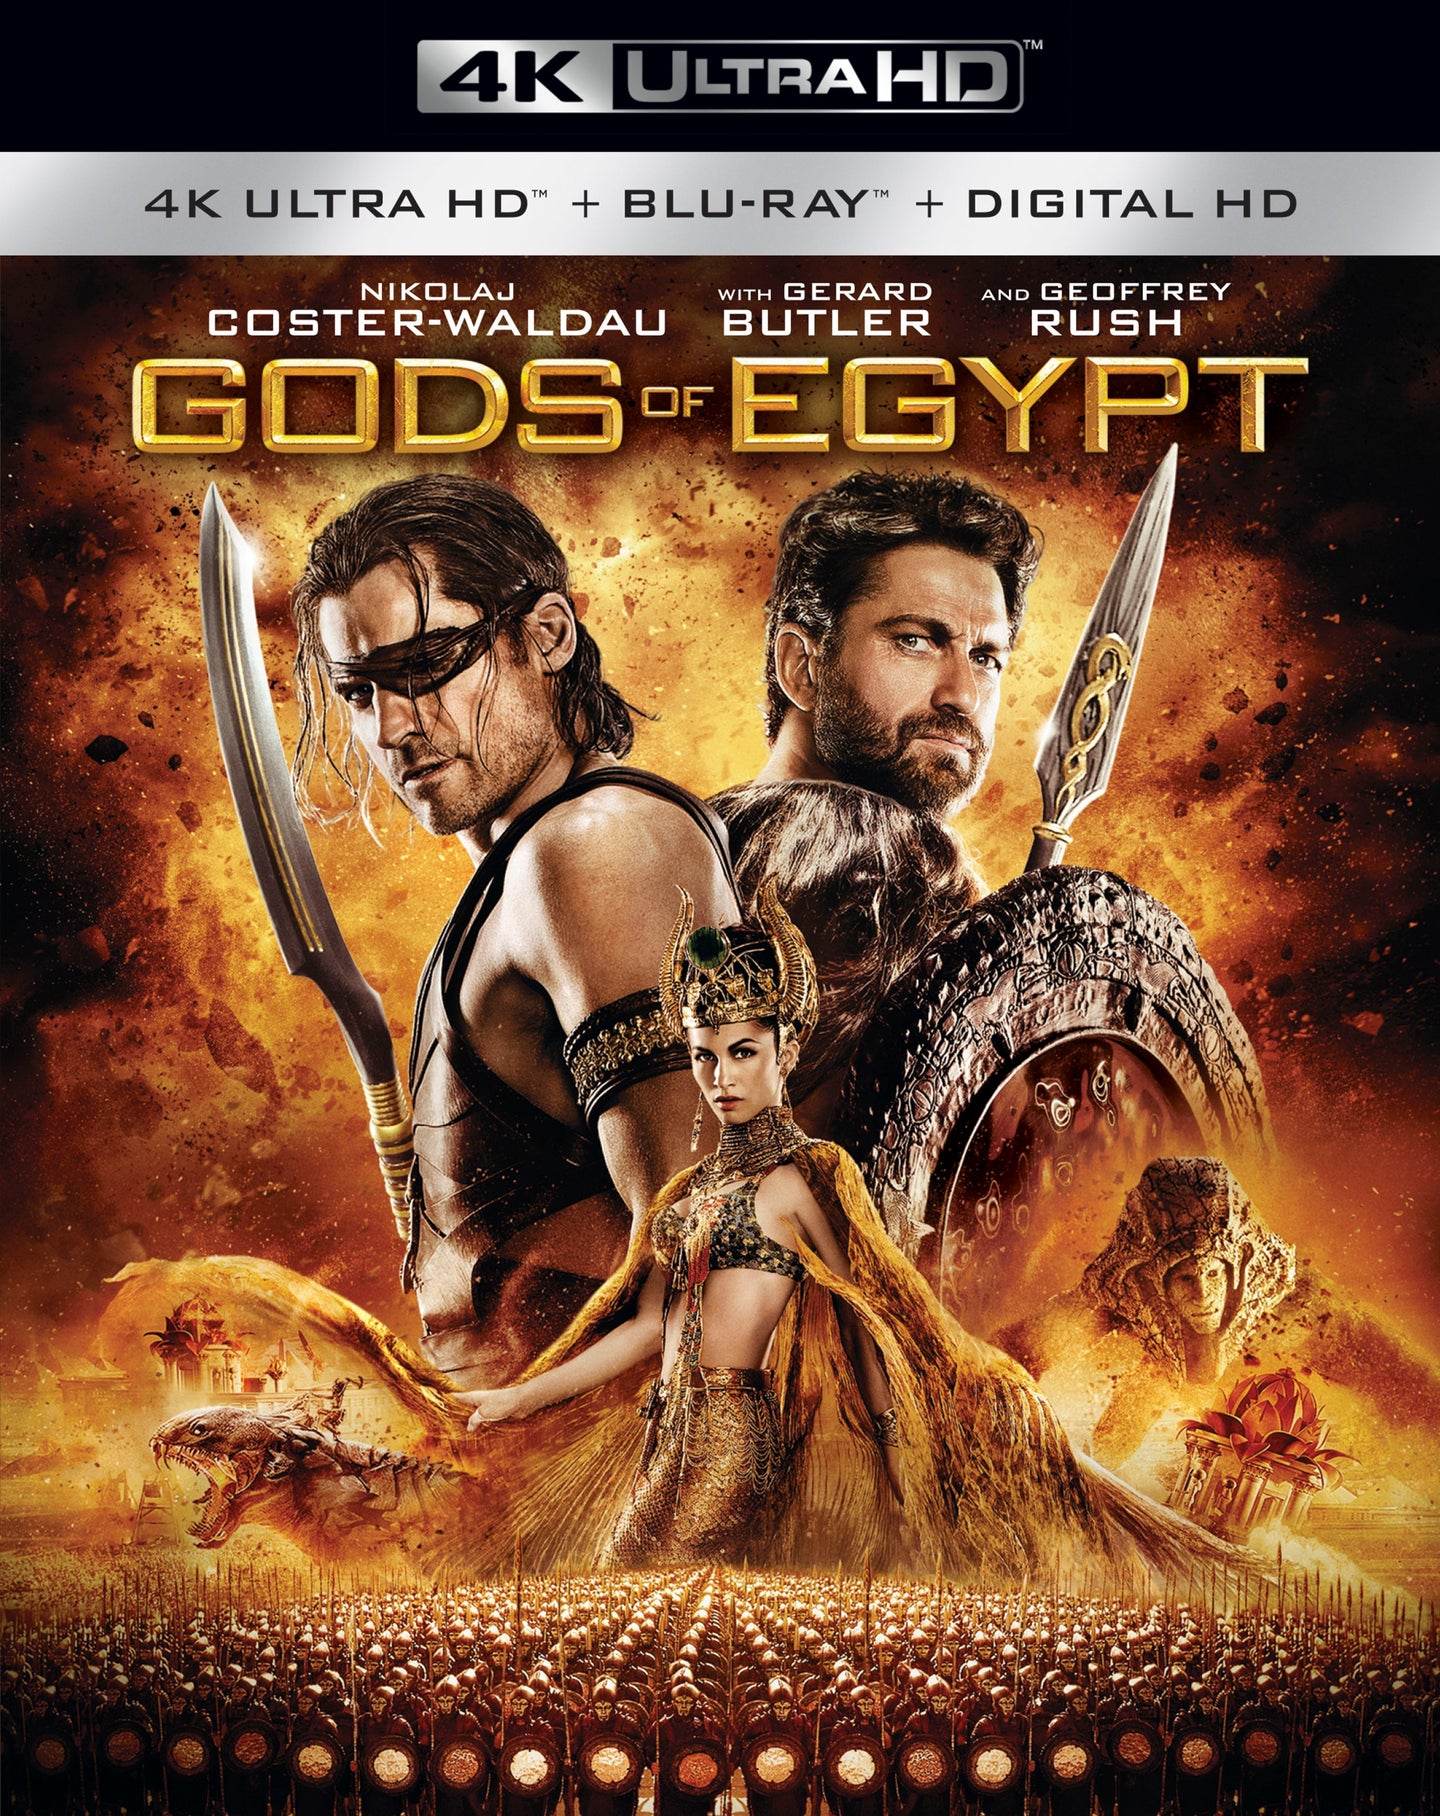 Gods of Egypt (2016) iTunes 4K redemption only